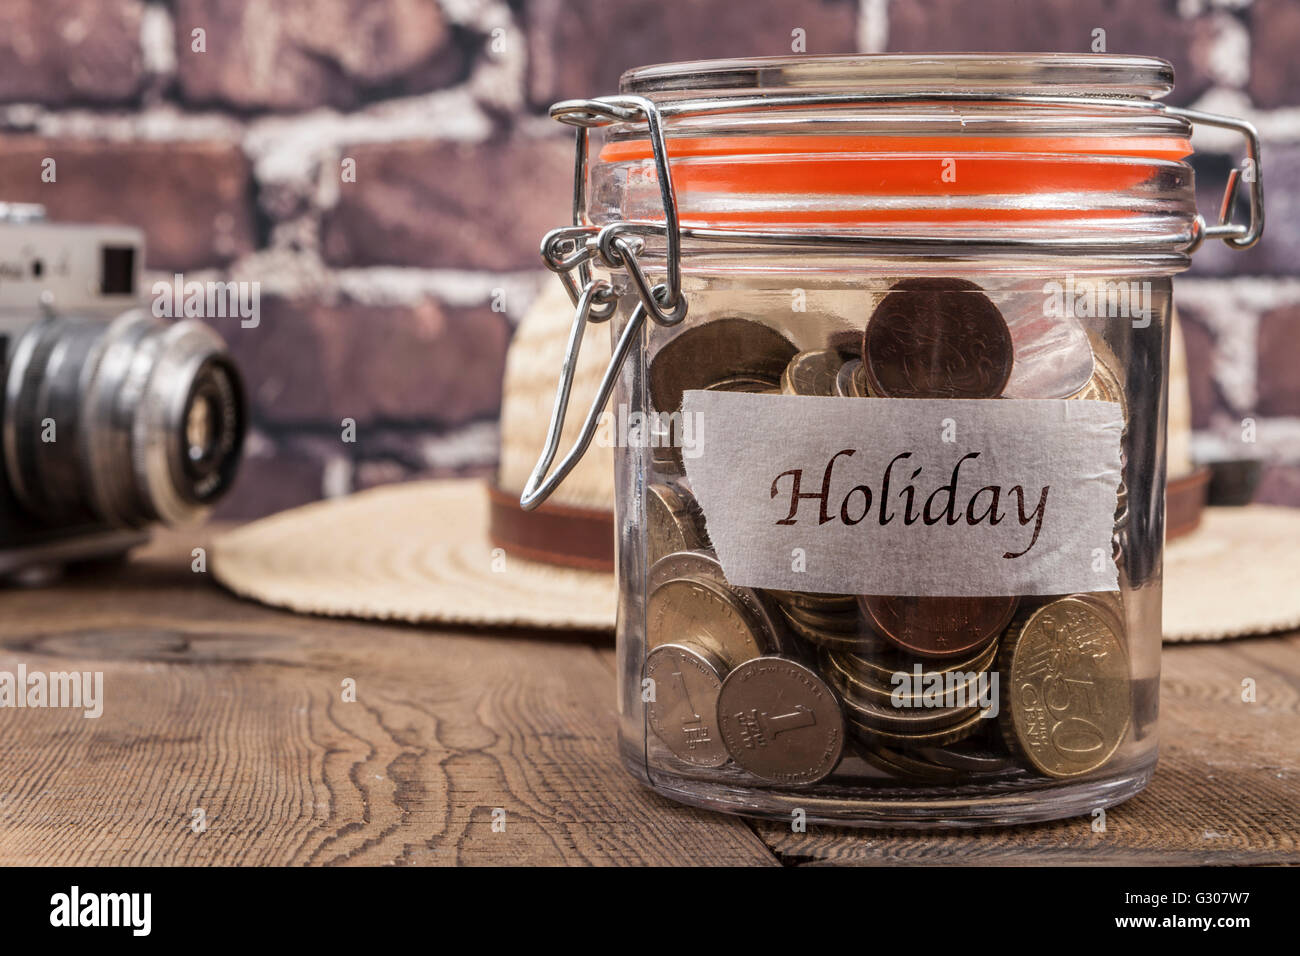 Adventure fund money jar - Money boxes -  - gifts and ideas for  holidays and everyday